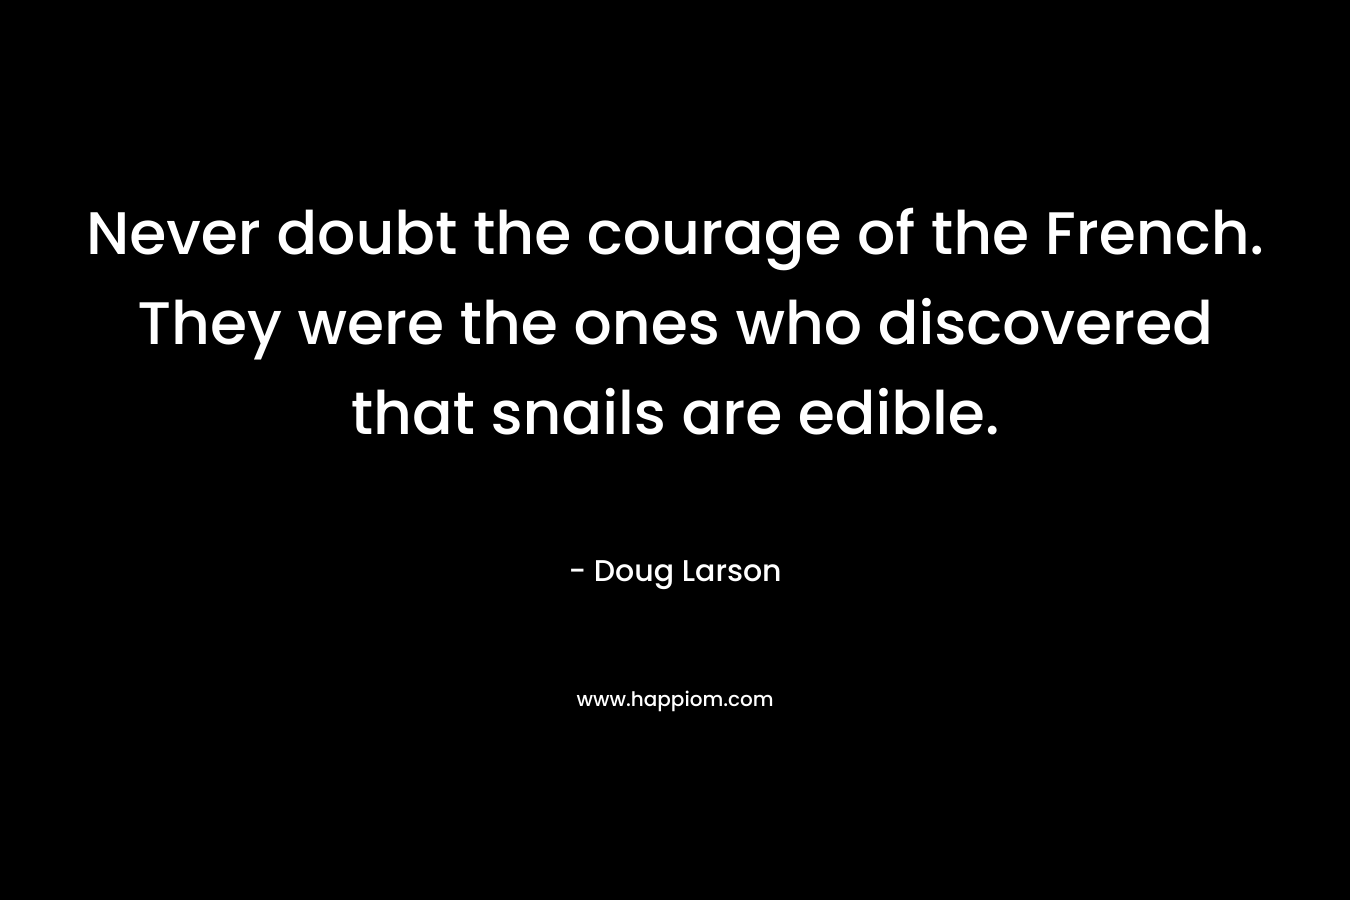 Never doubt the courage of the French. They were the ones who discovered that snails are edible. – Doug Larson